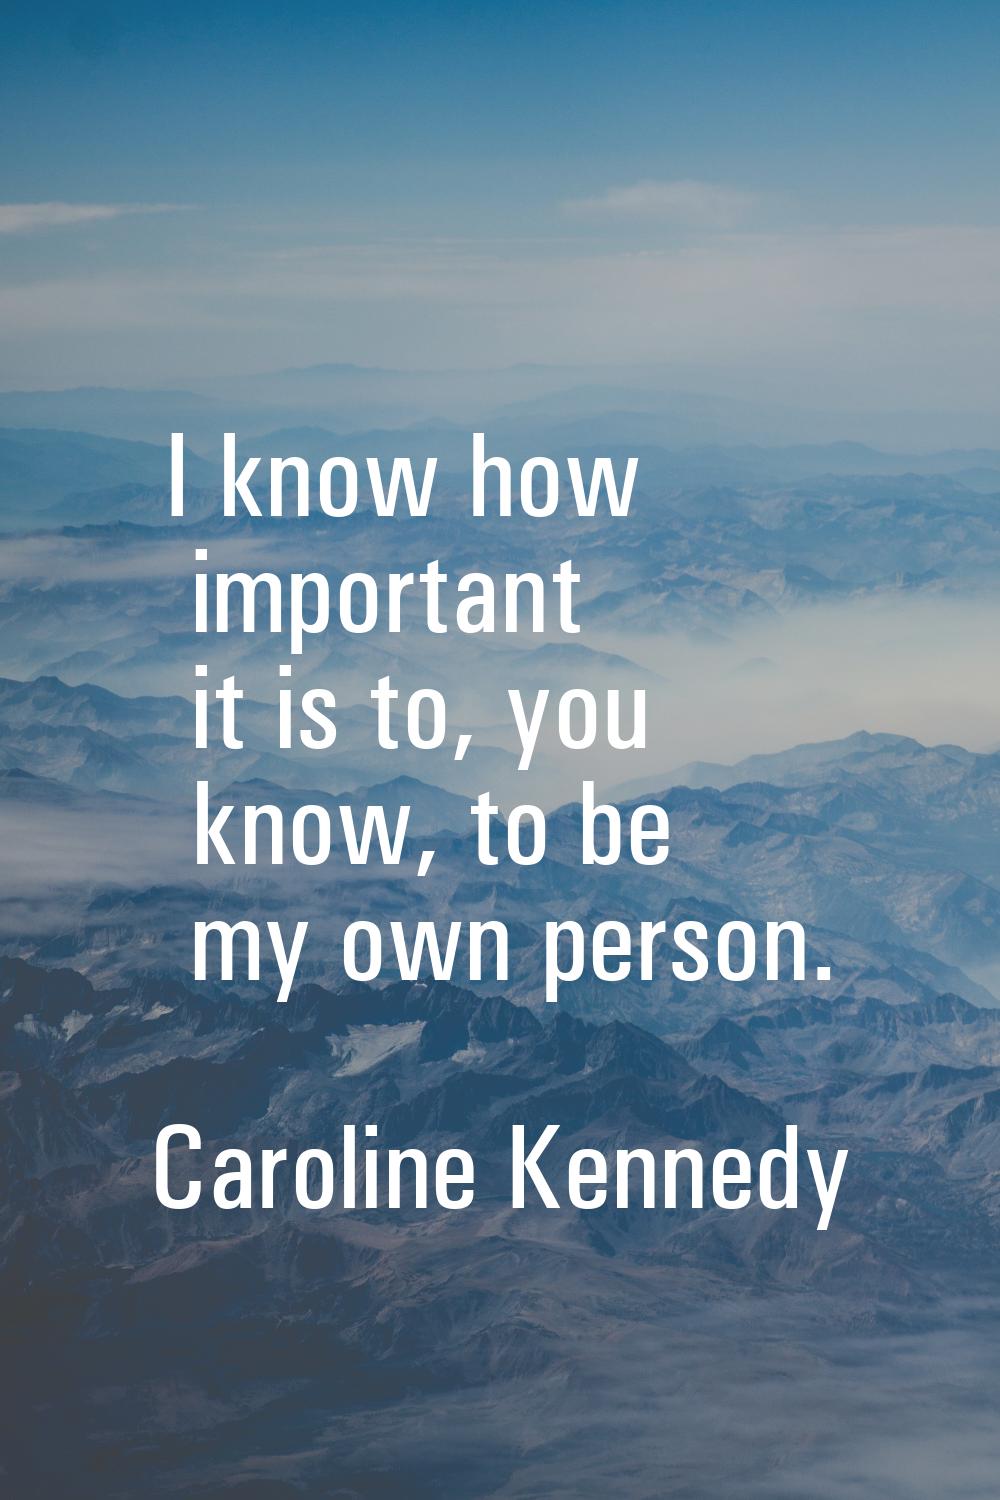 I know how important it is to, you know, to be my own person.